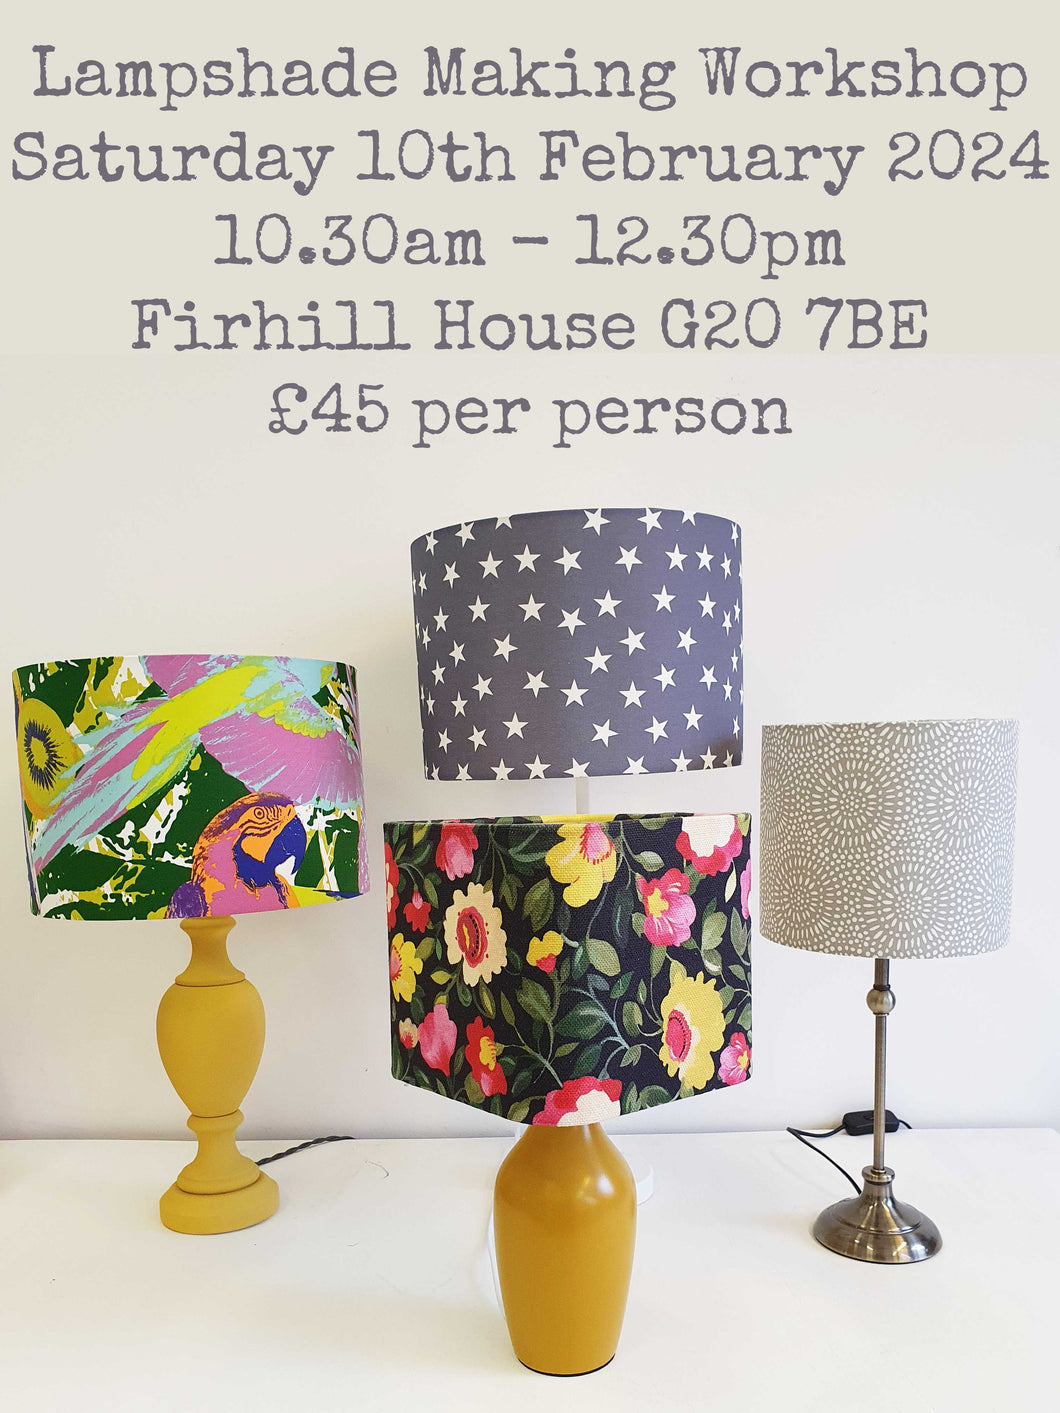 Lampshade Making Class Saturday 10th February 2024 10.30am till 12.30pm